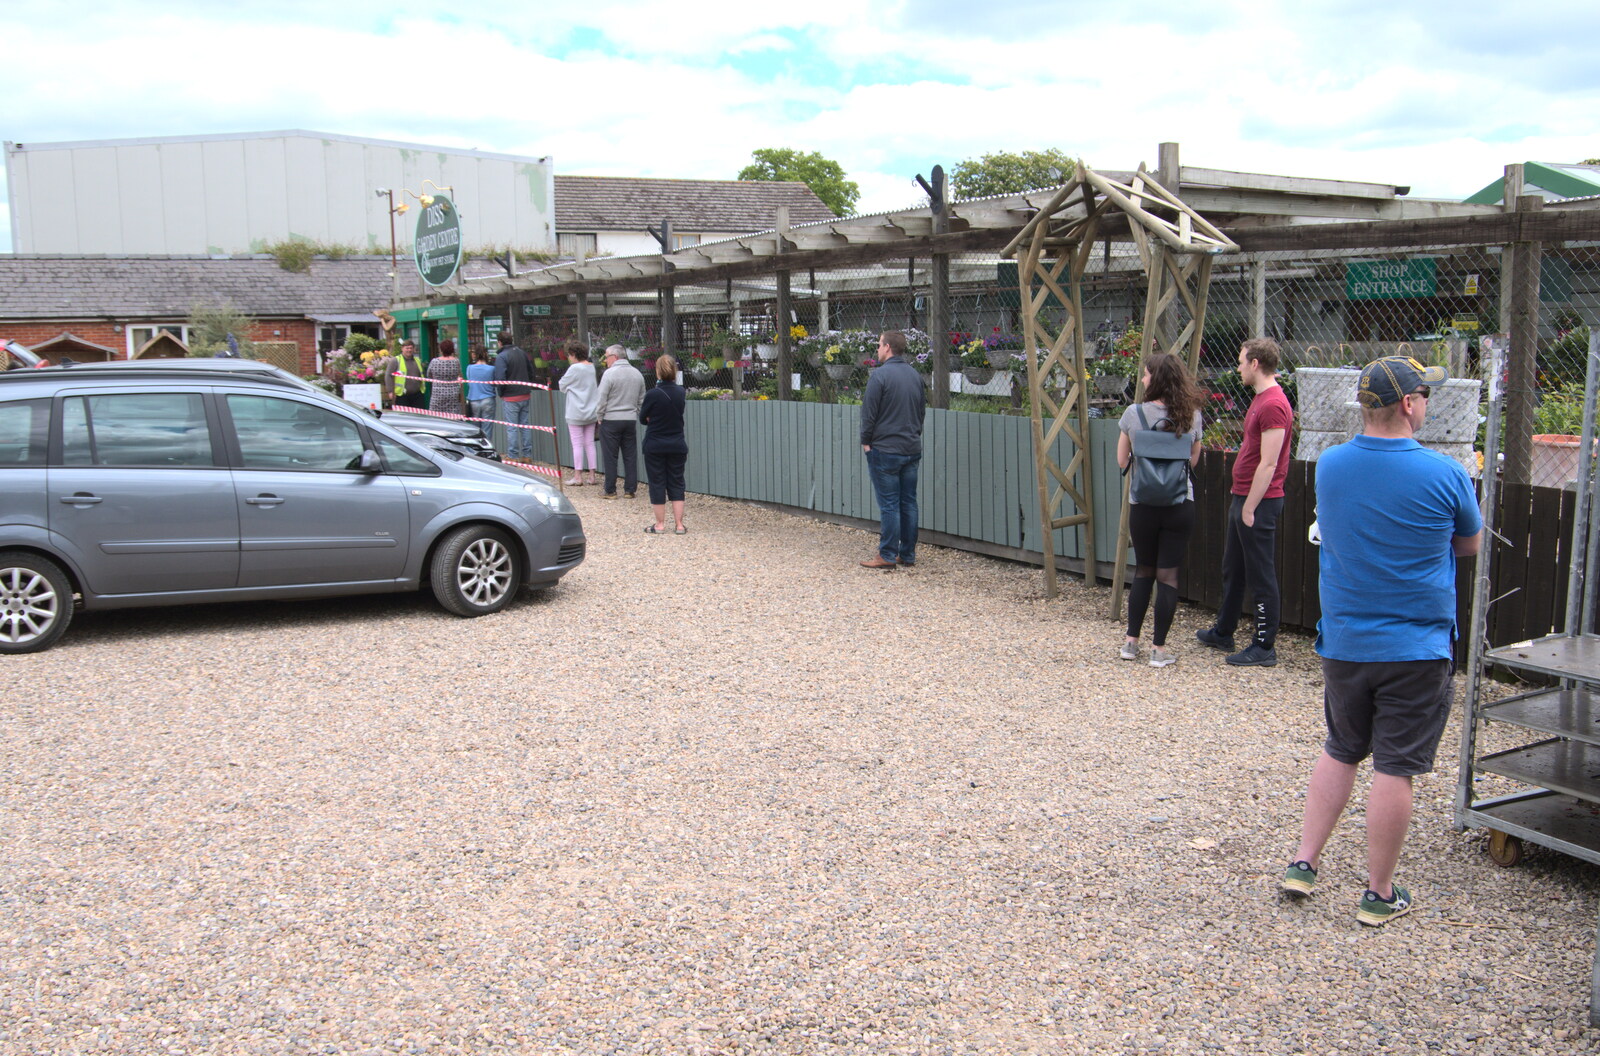 There are long queues at Diss Garden Centre from More Lockdown Fun, Diss and Eye, Norfolk and Suffolk - 30th May 2020